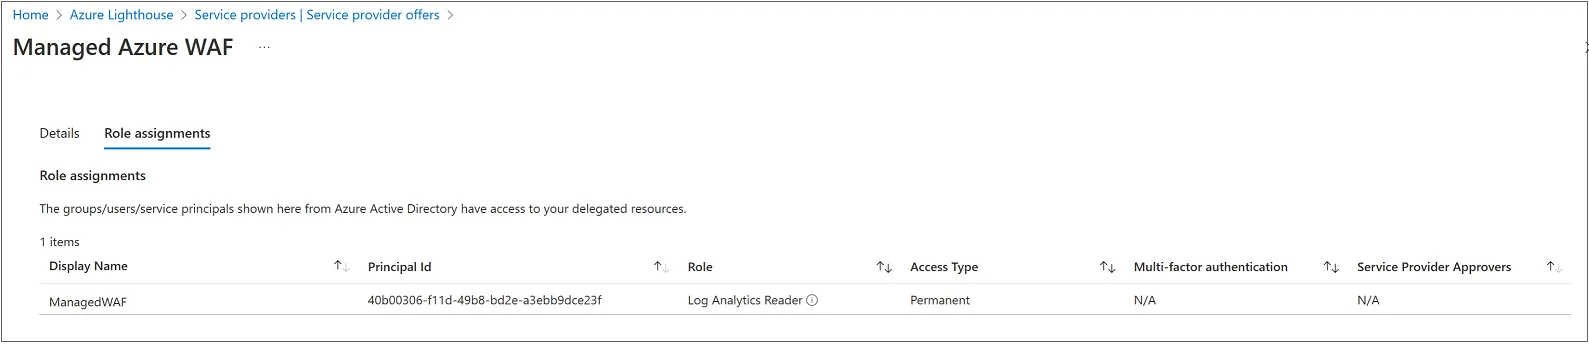 Azure Lighthouse role assignment overview